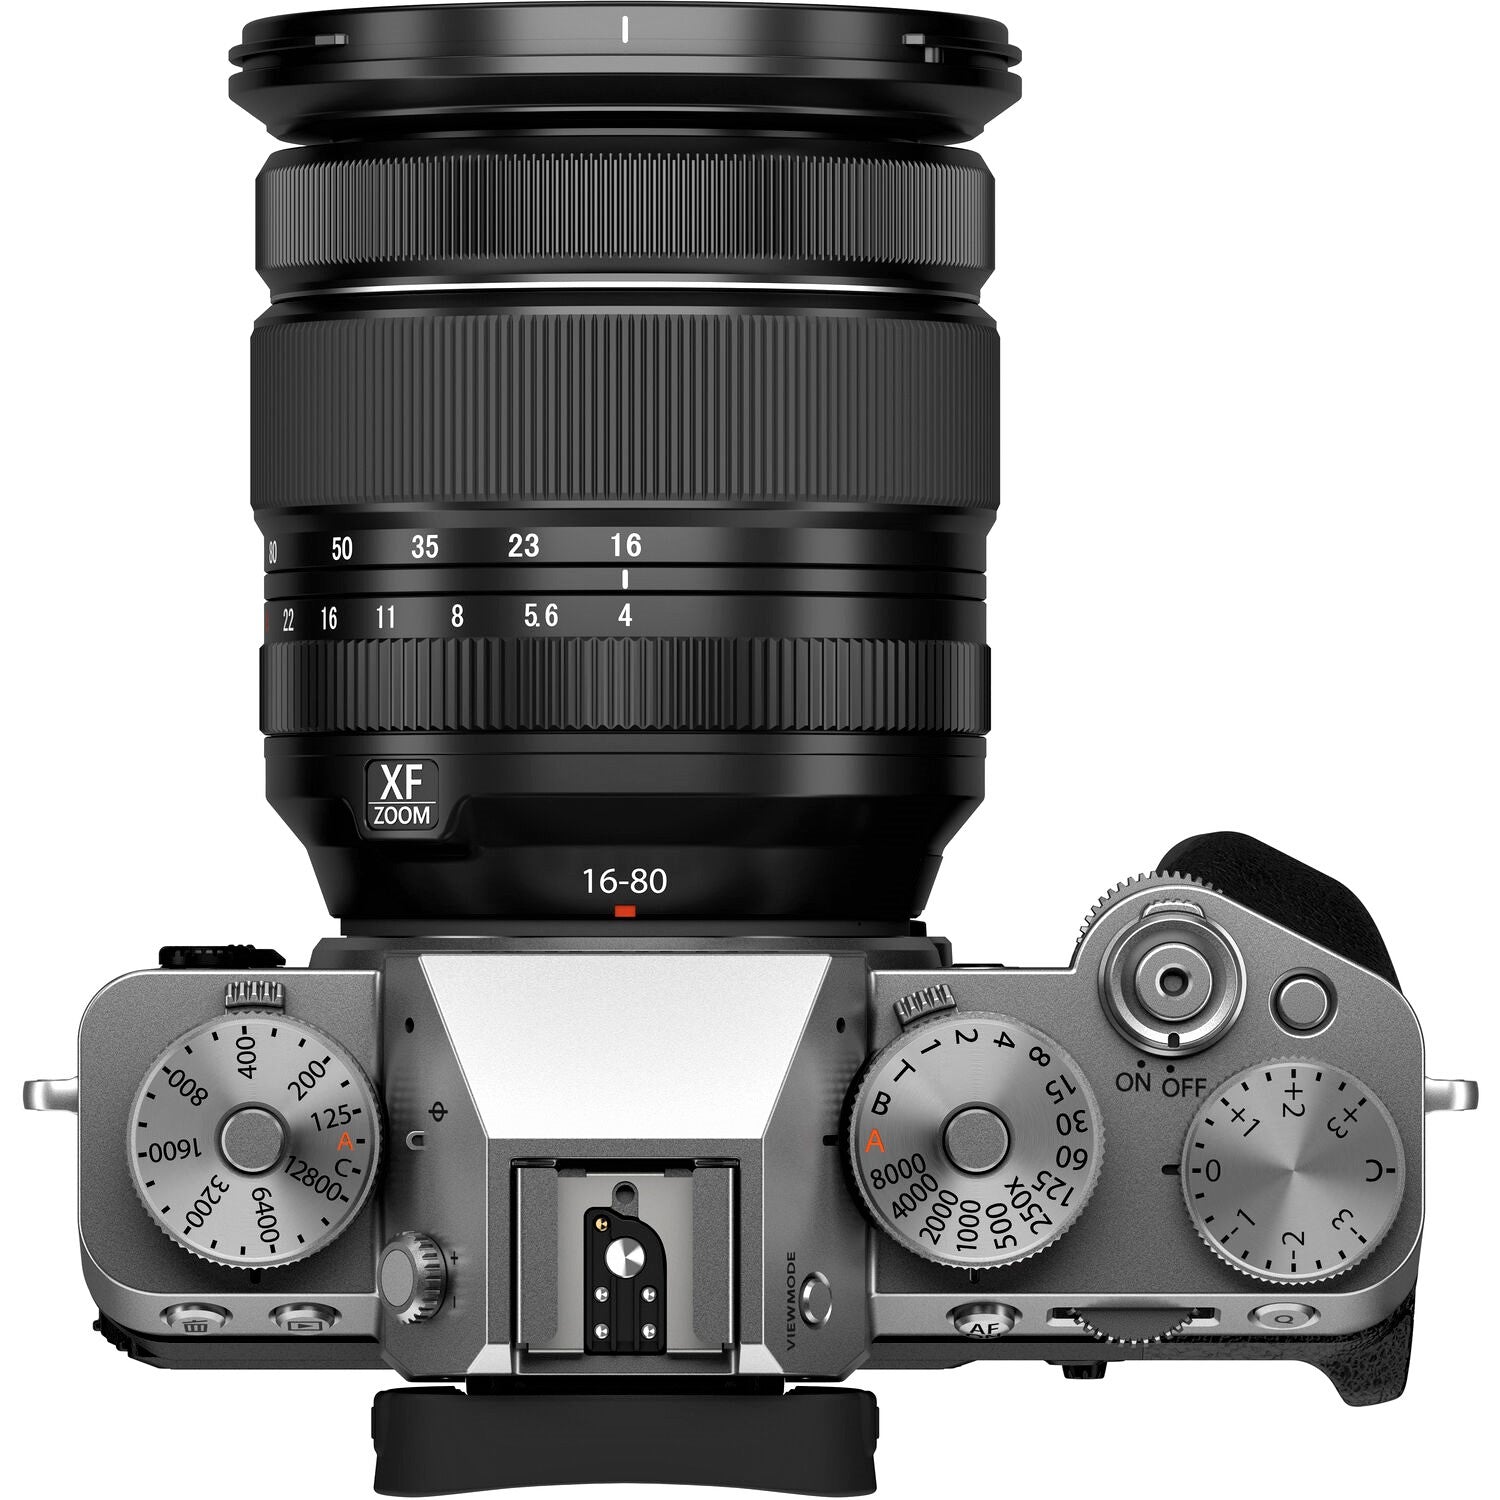 Fujifilm X-T5 Mirrorless Camera with 16-80mm Lens (Silver) - Top View